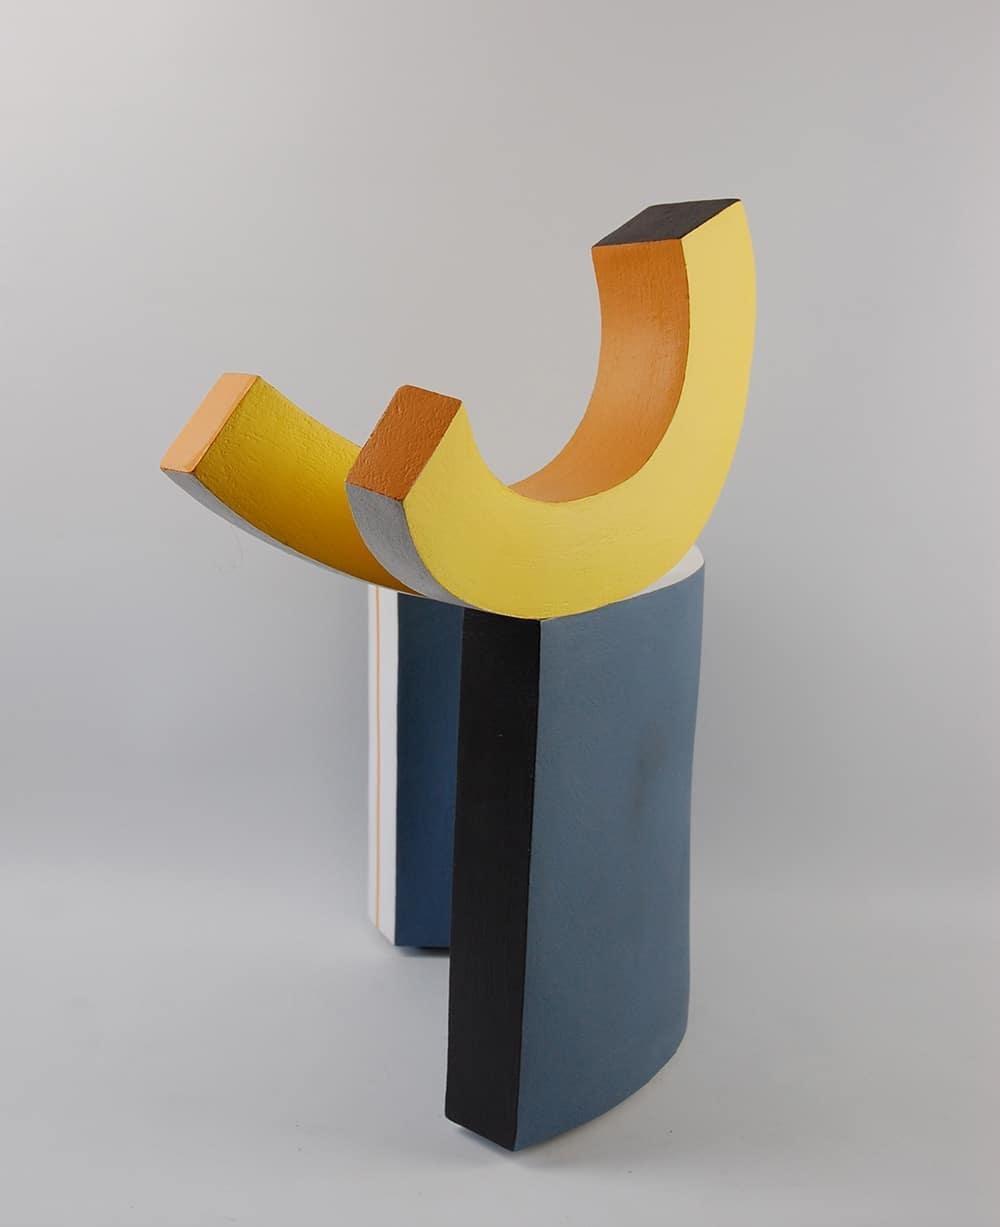 Bird is a unique fired clay constructed and painted sculpture by contemporary artist Patricia Volk, dimensions are 54 × 56 × 30 cm (21.3 × 22 × 11.8 in). 
The sculpture is signed and comes with a certificate of authenticity. 

Abstract sculptures by